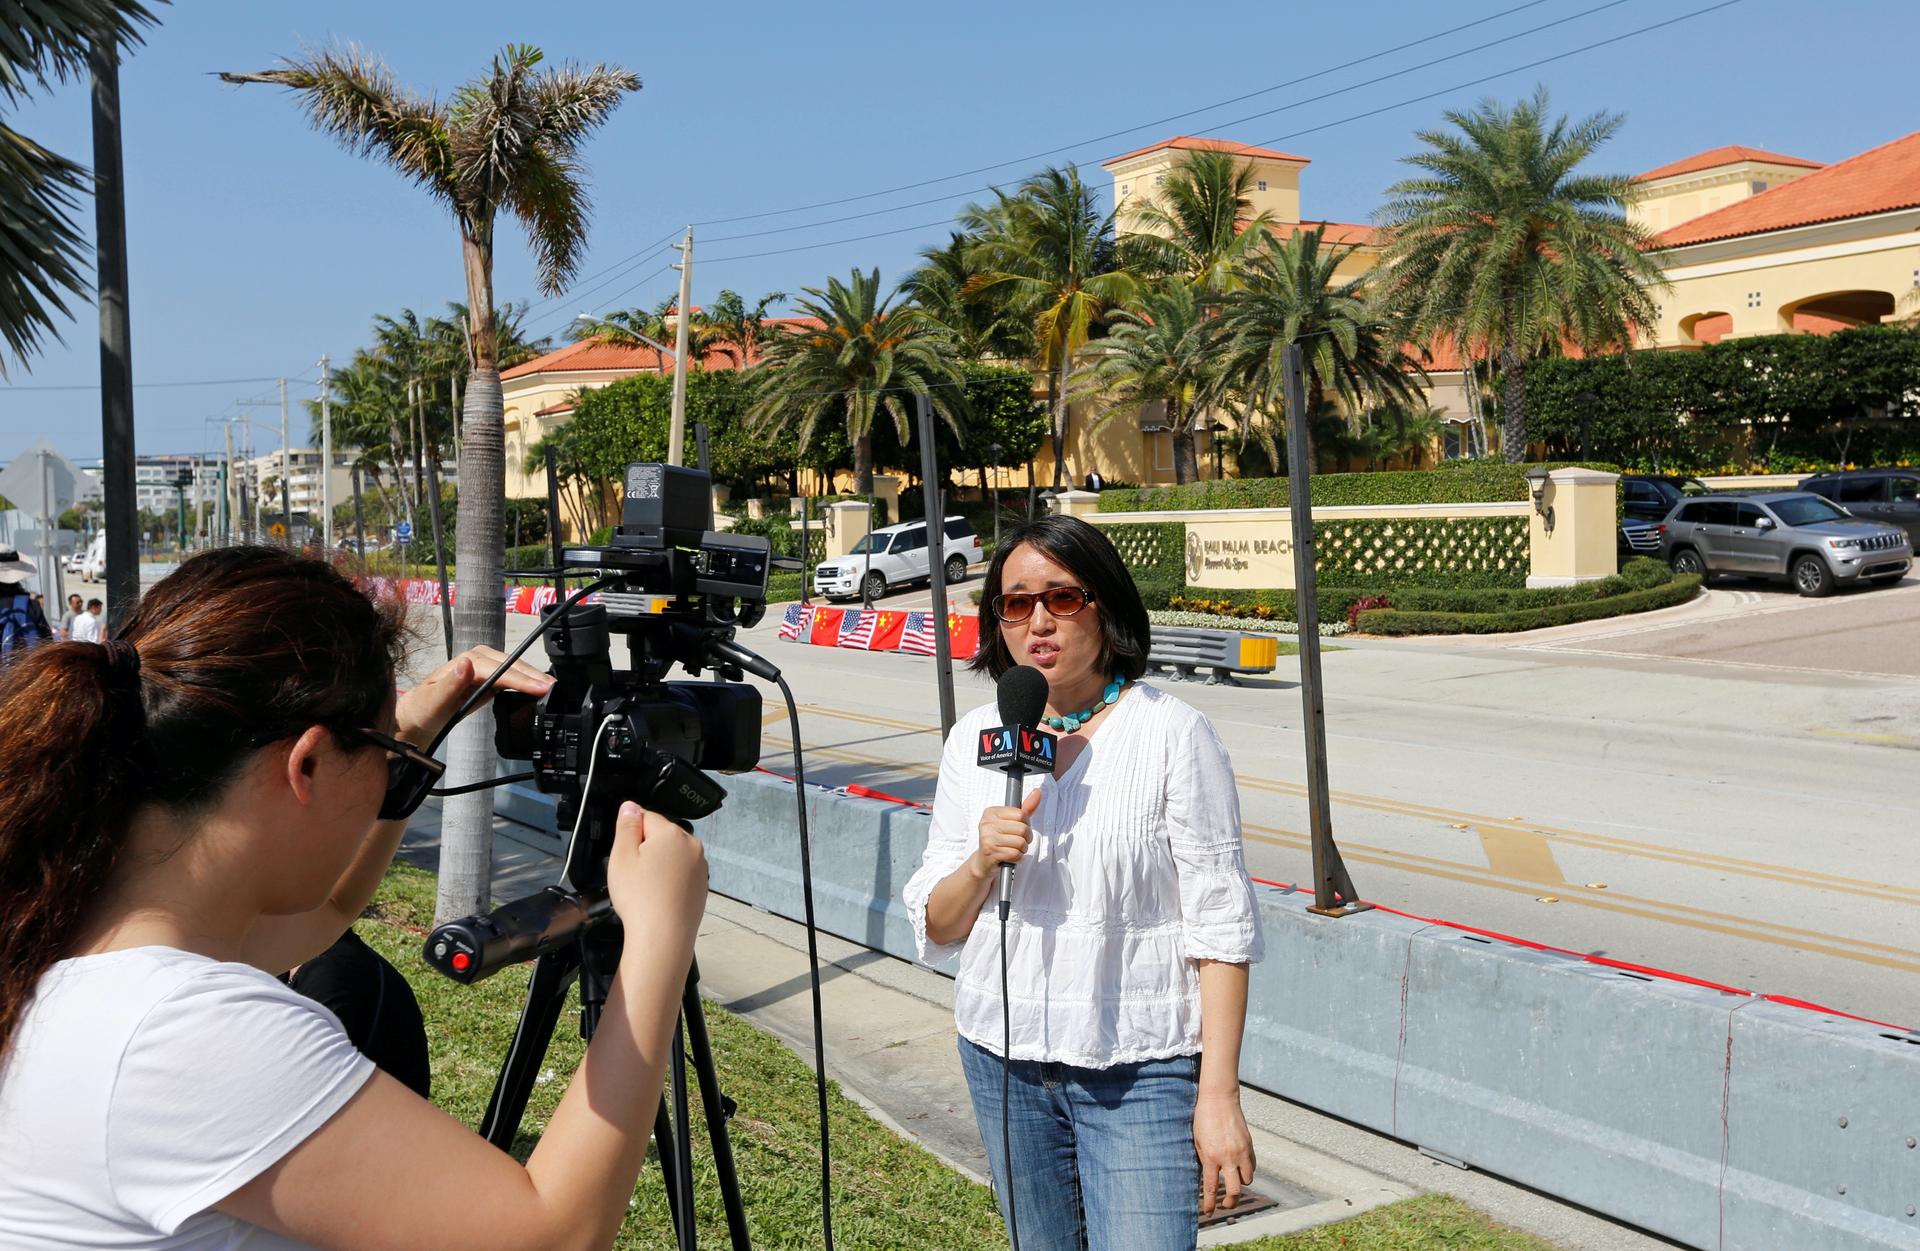 A woman reporters with a camera crew outside near palm trees.